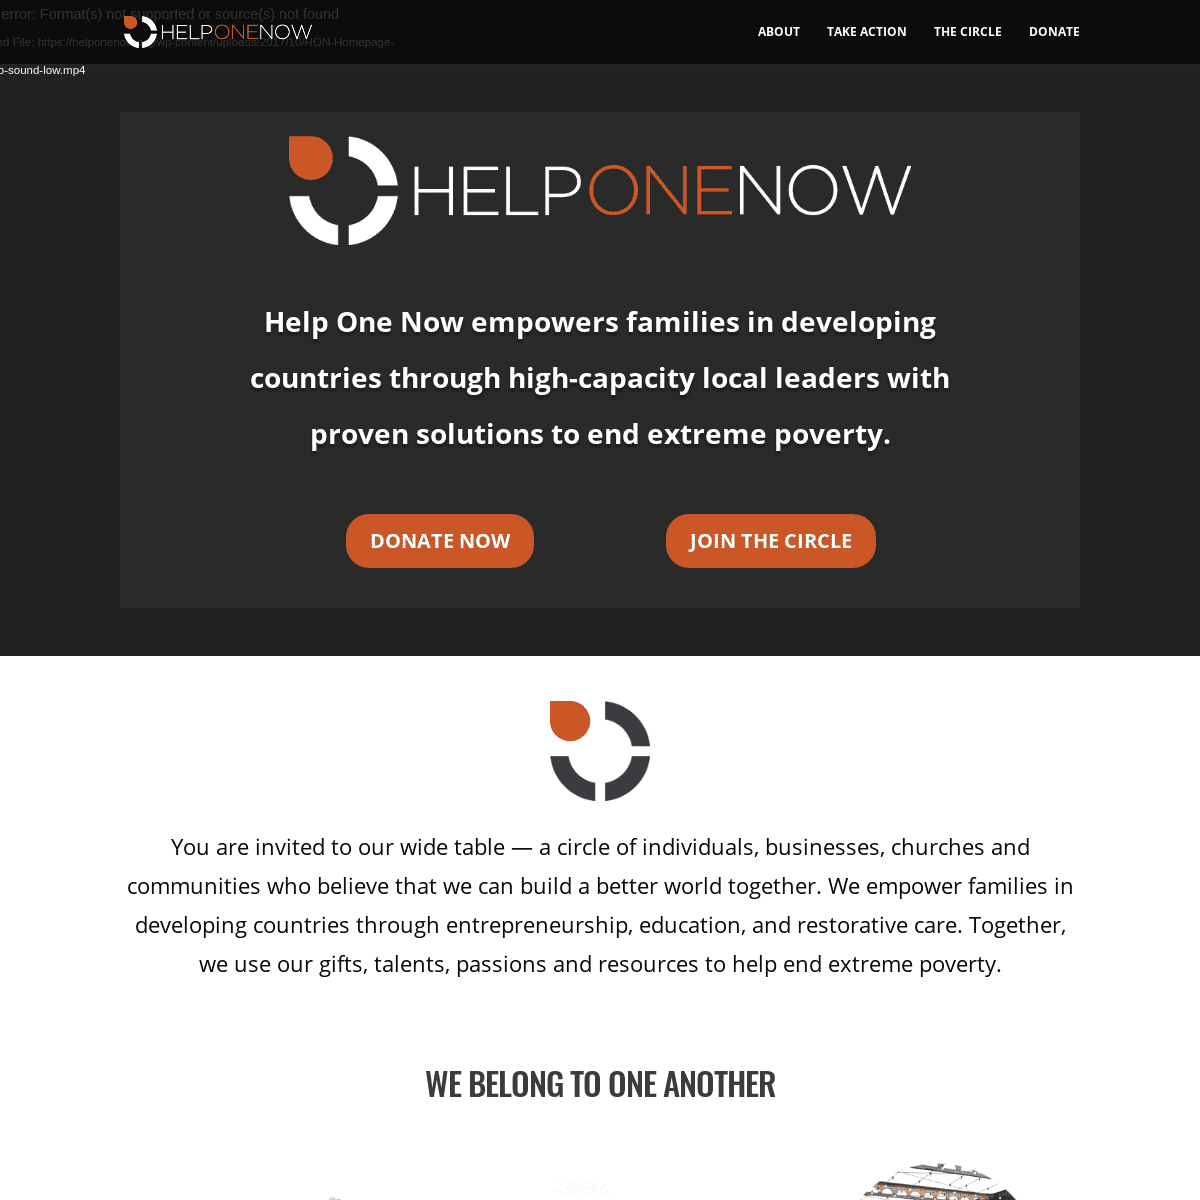 A complete backup of https://helponenow.org